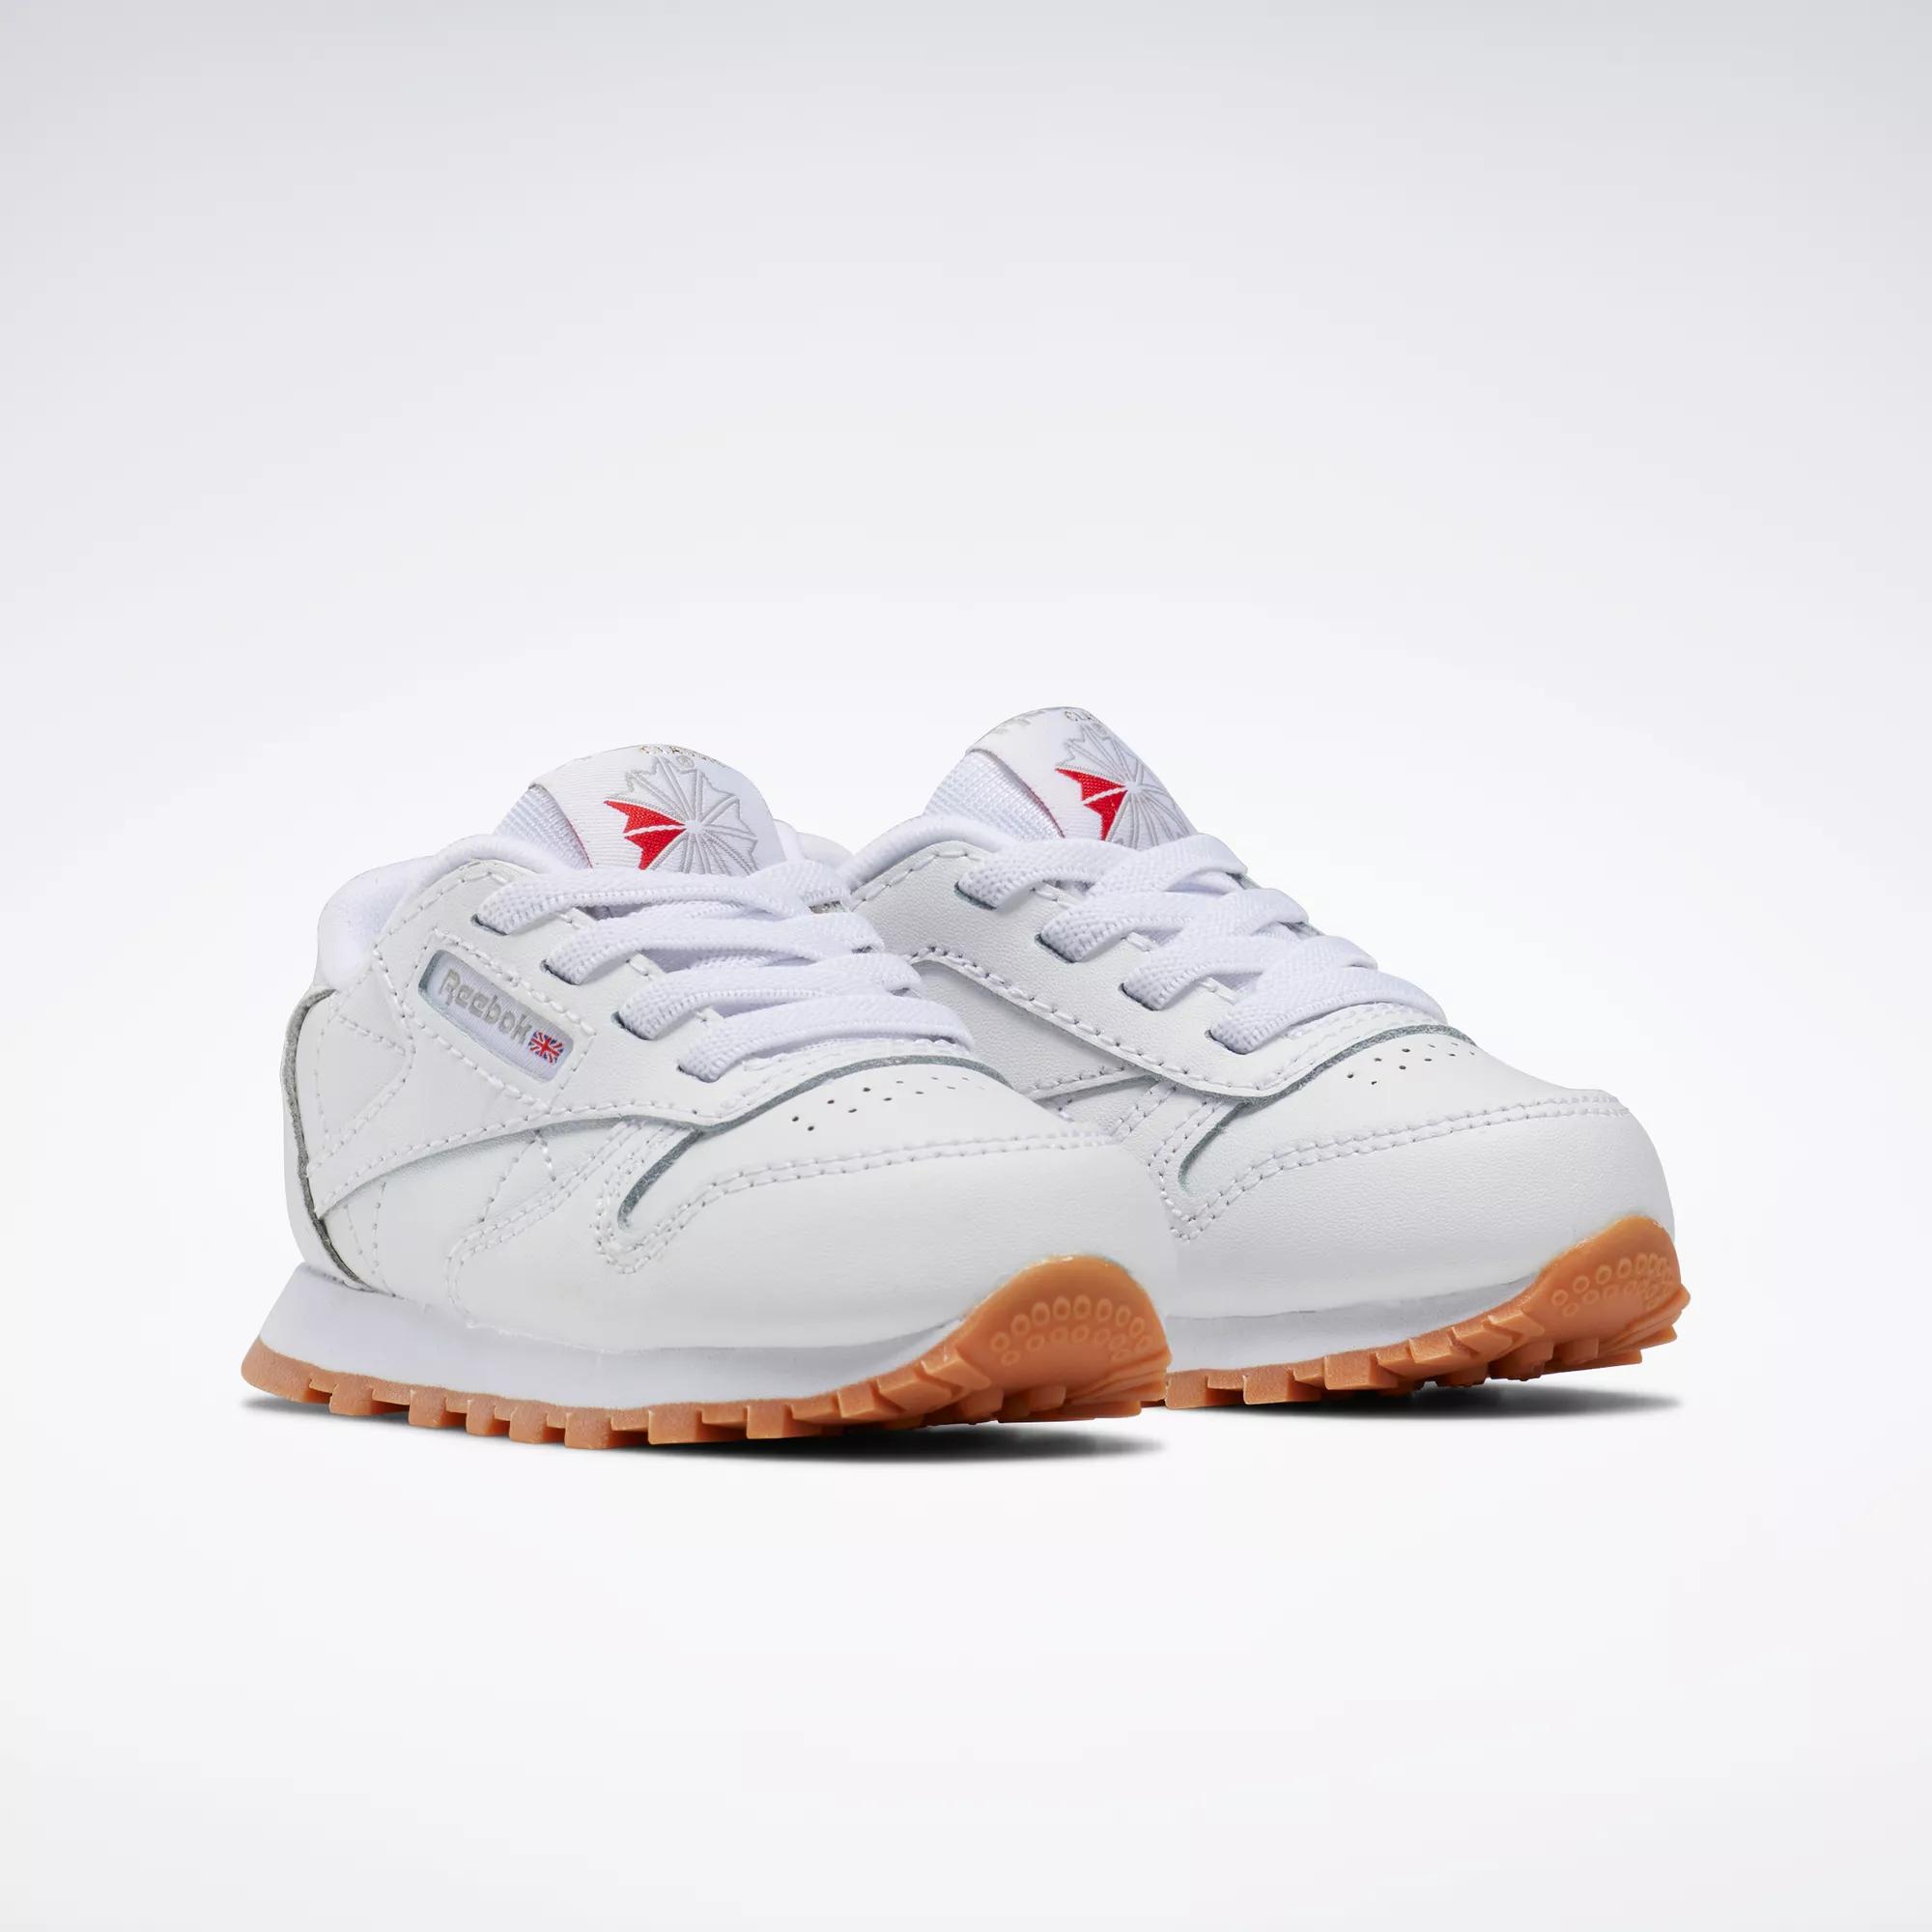 Classic Leather Shoes - Toddler - Ftwr White / Ftwr White / Reebok Rubber  Gum-02 | Reebok